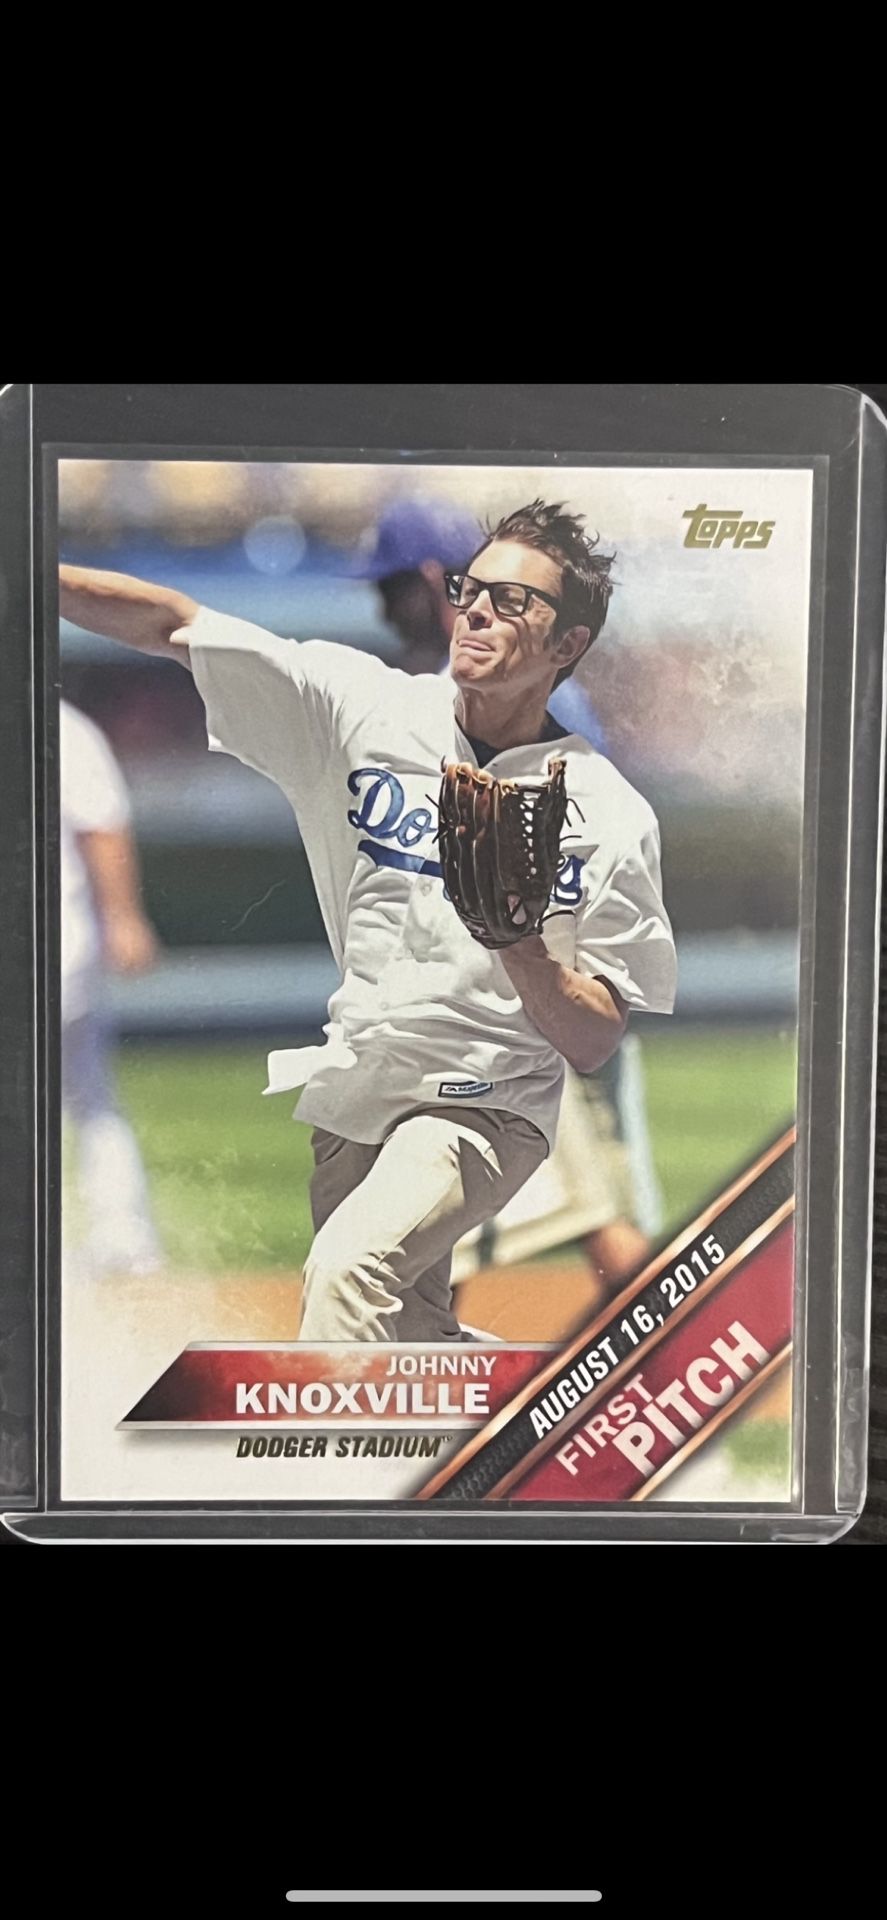 Johnny Knoxville Mint Condition Topps Card